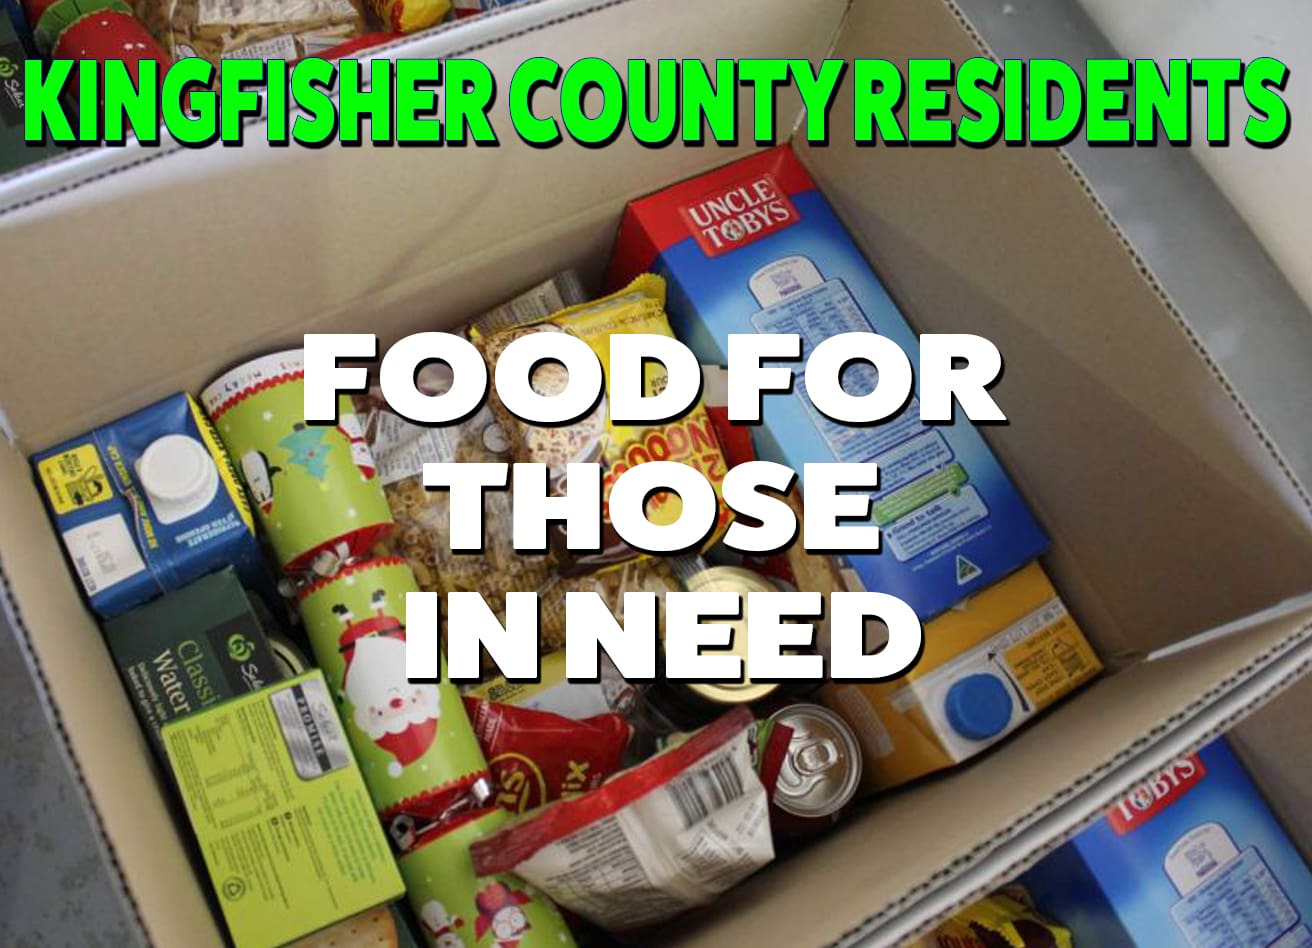 THOSE IN NEED WHO LIVE IN KINGFISHER COUNTY CAN PICK UP A CHRISTMAS FOOD BOX!